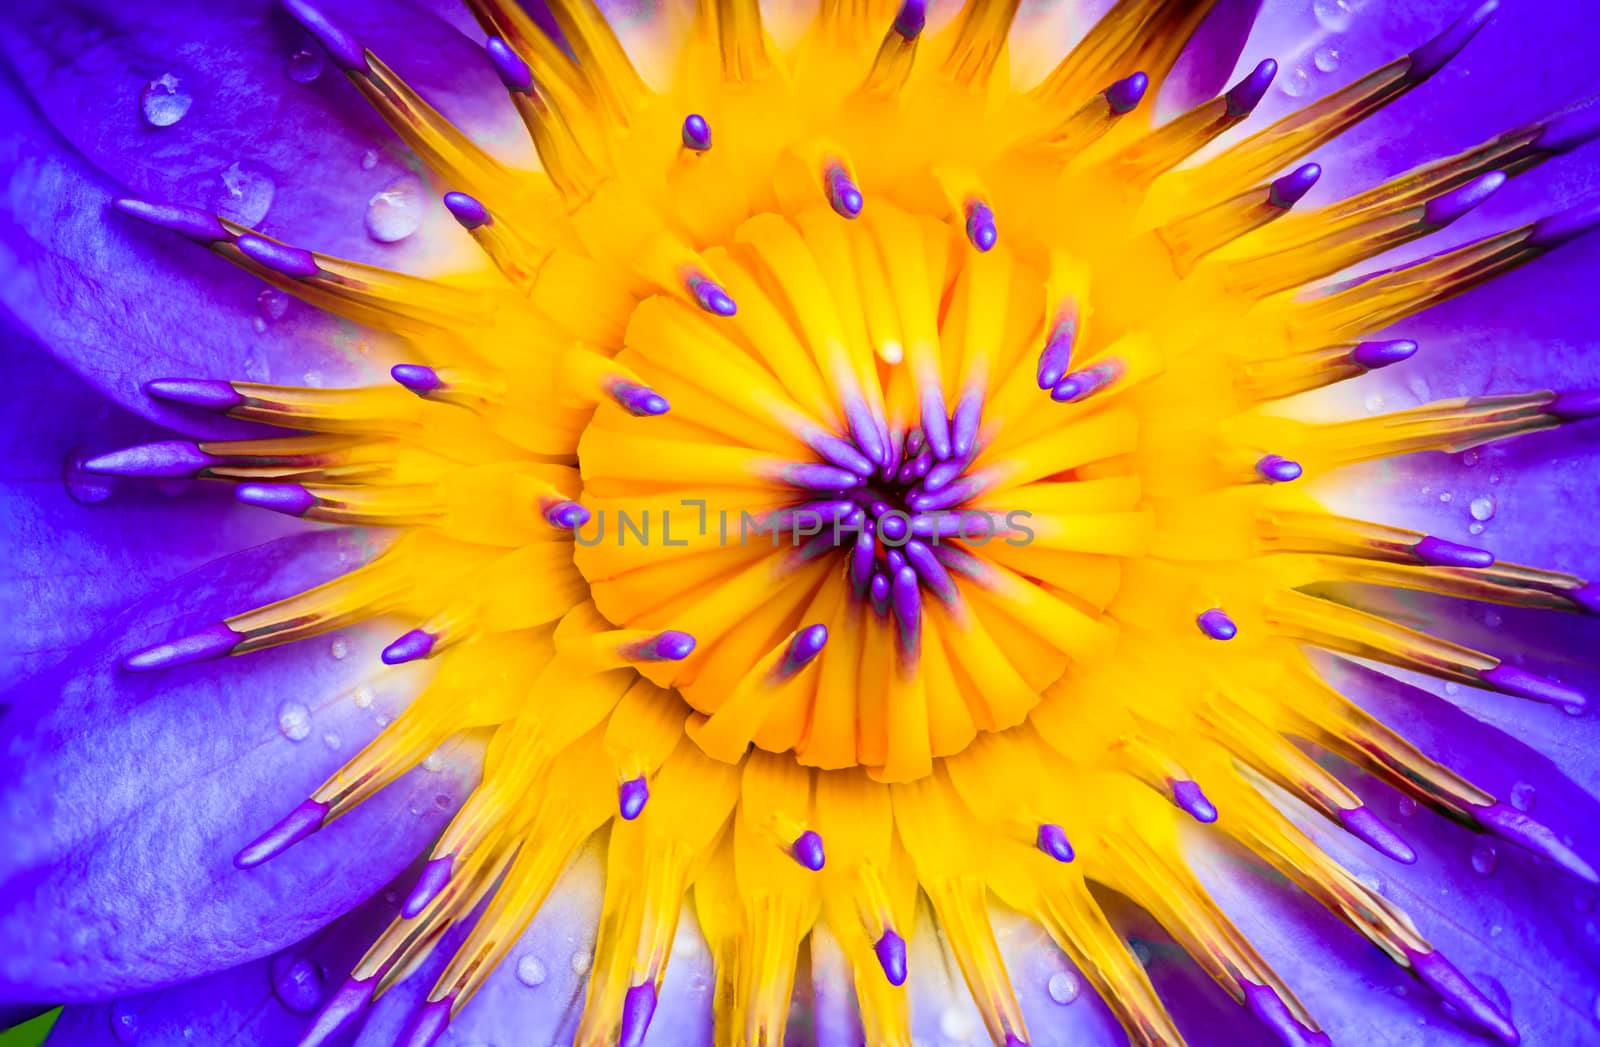 Closeup picture of a purple water lily